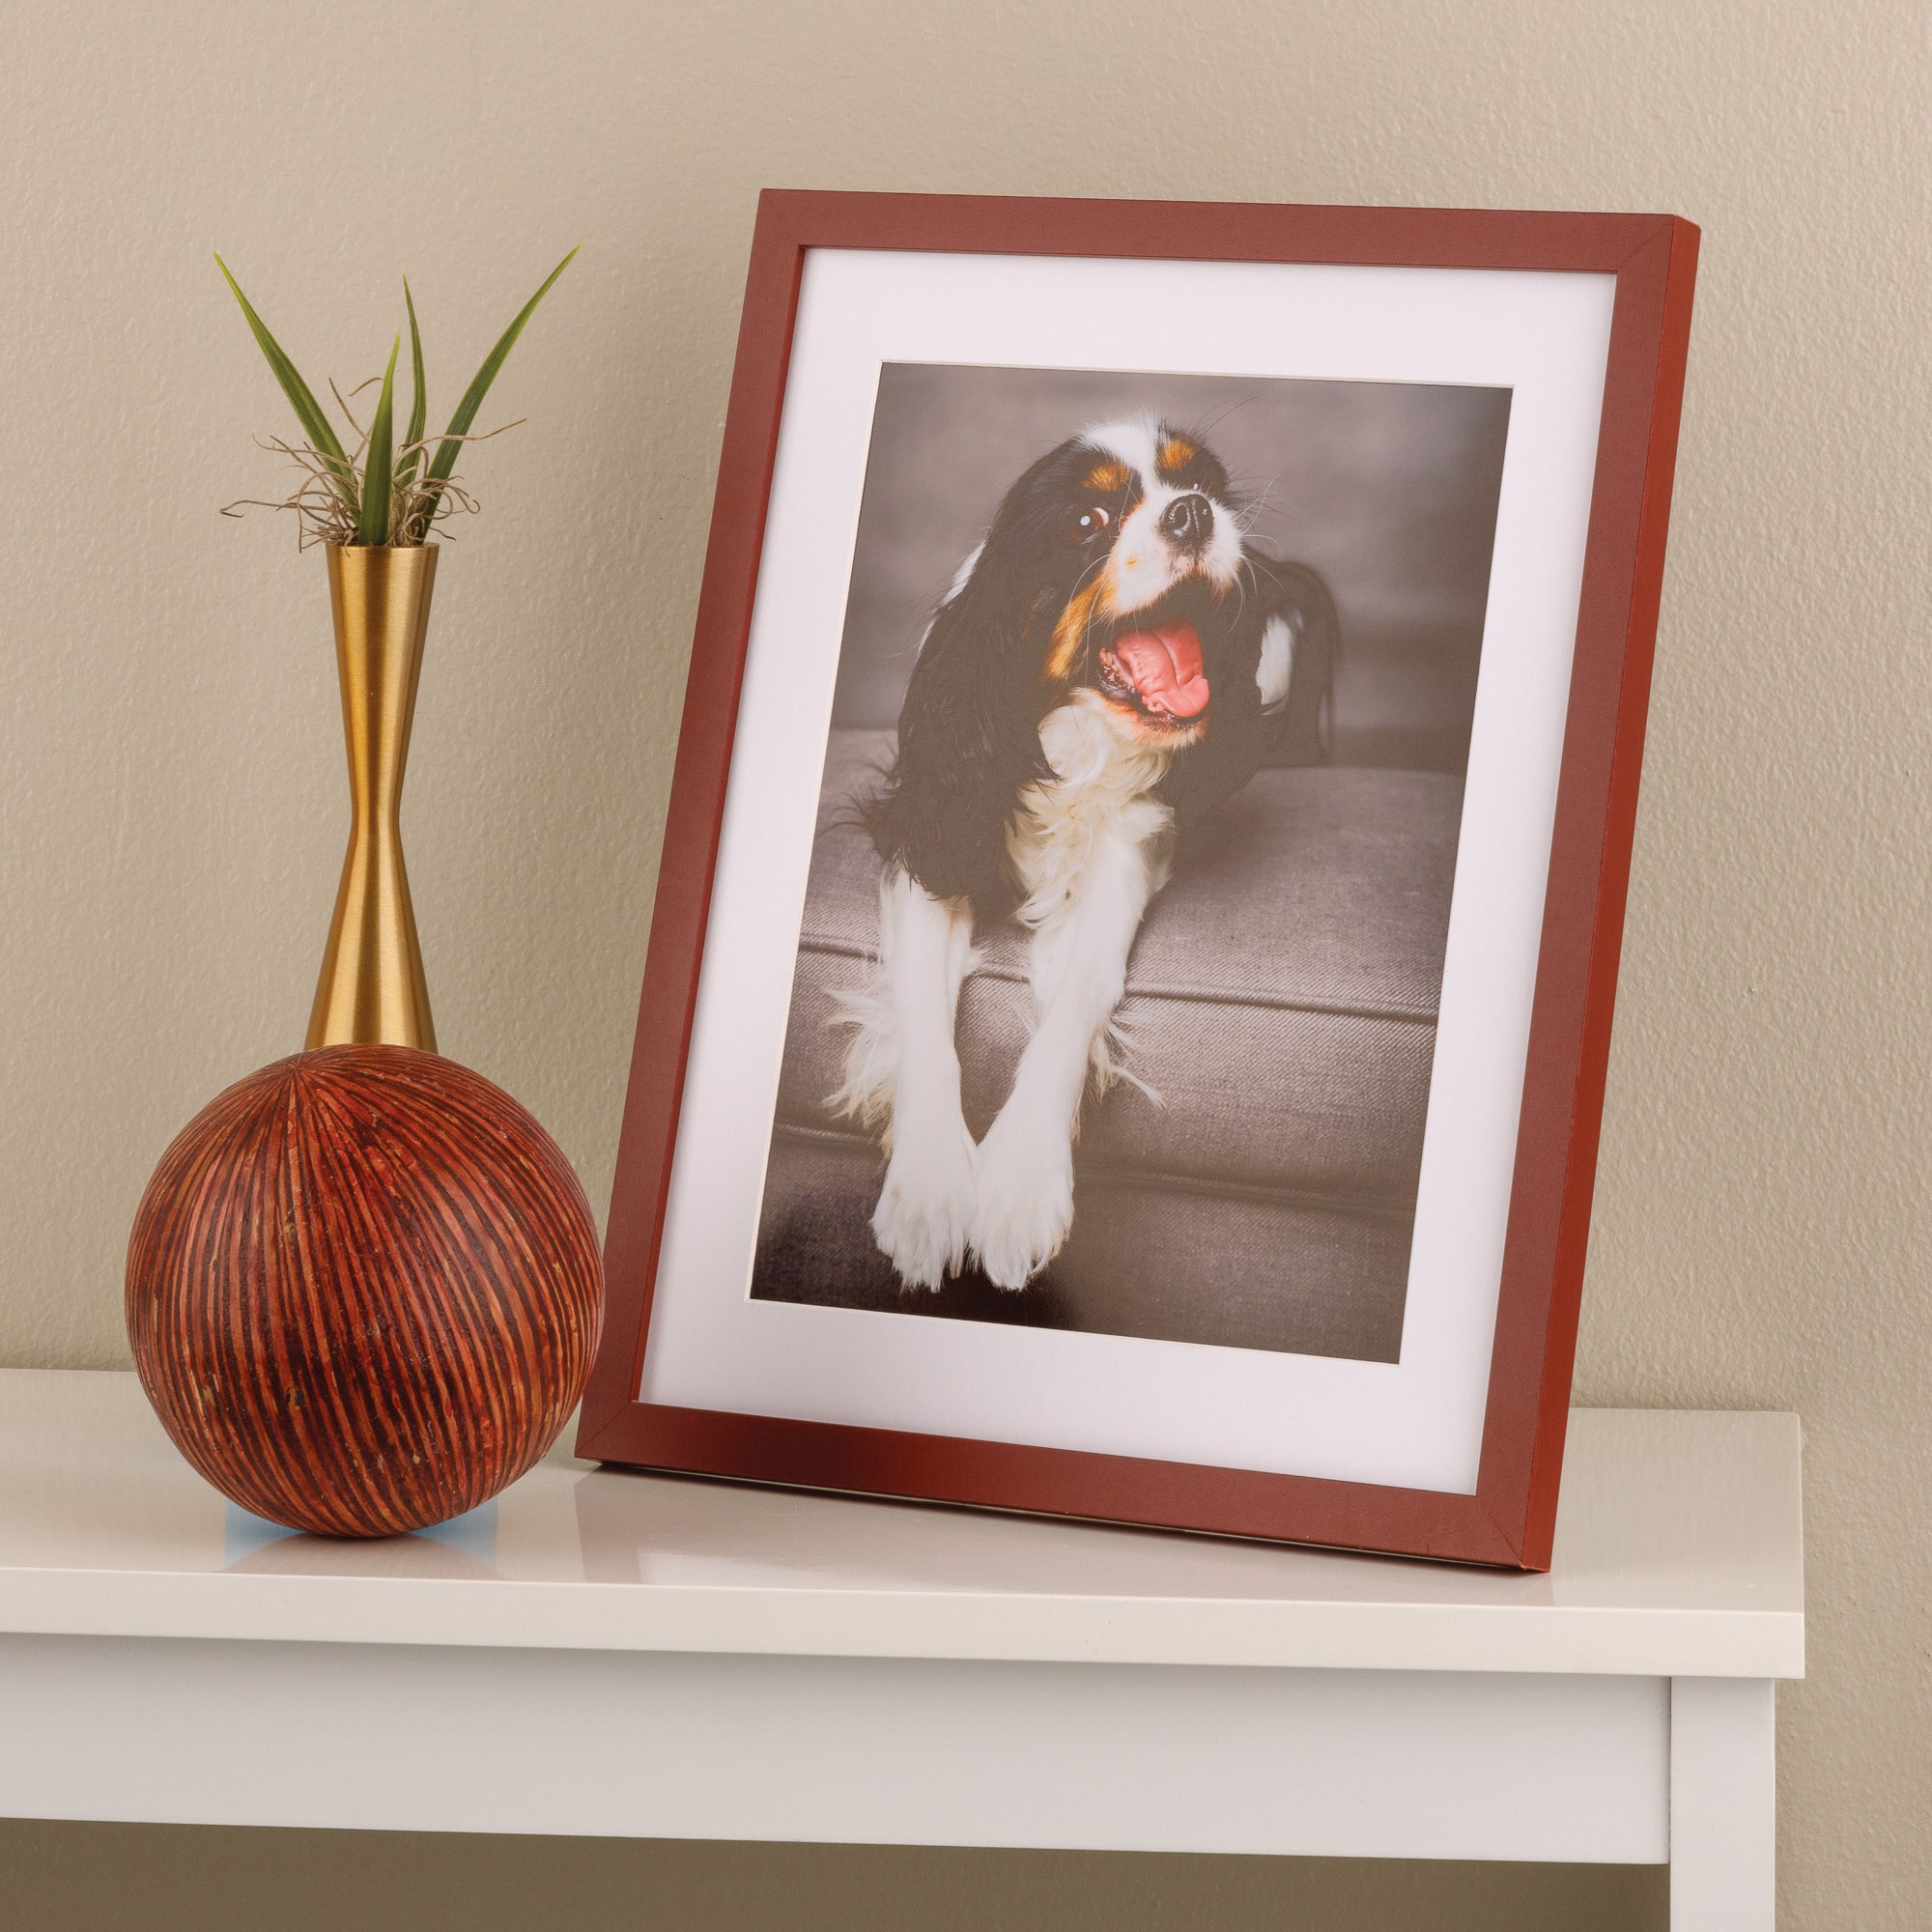 Burgundy Linear 8&#x22; x 10&#x22; Frame with Mat, Simply Essentials&#x2122; by Studio D&#xE9;cor&#xAE;